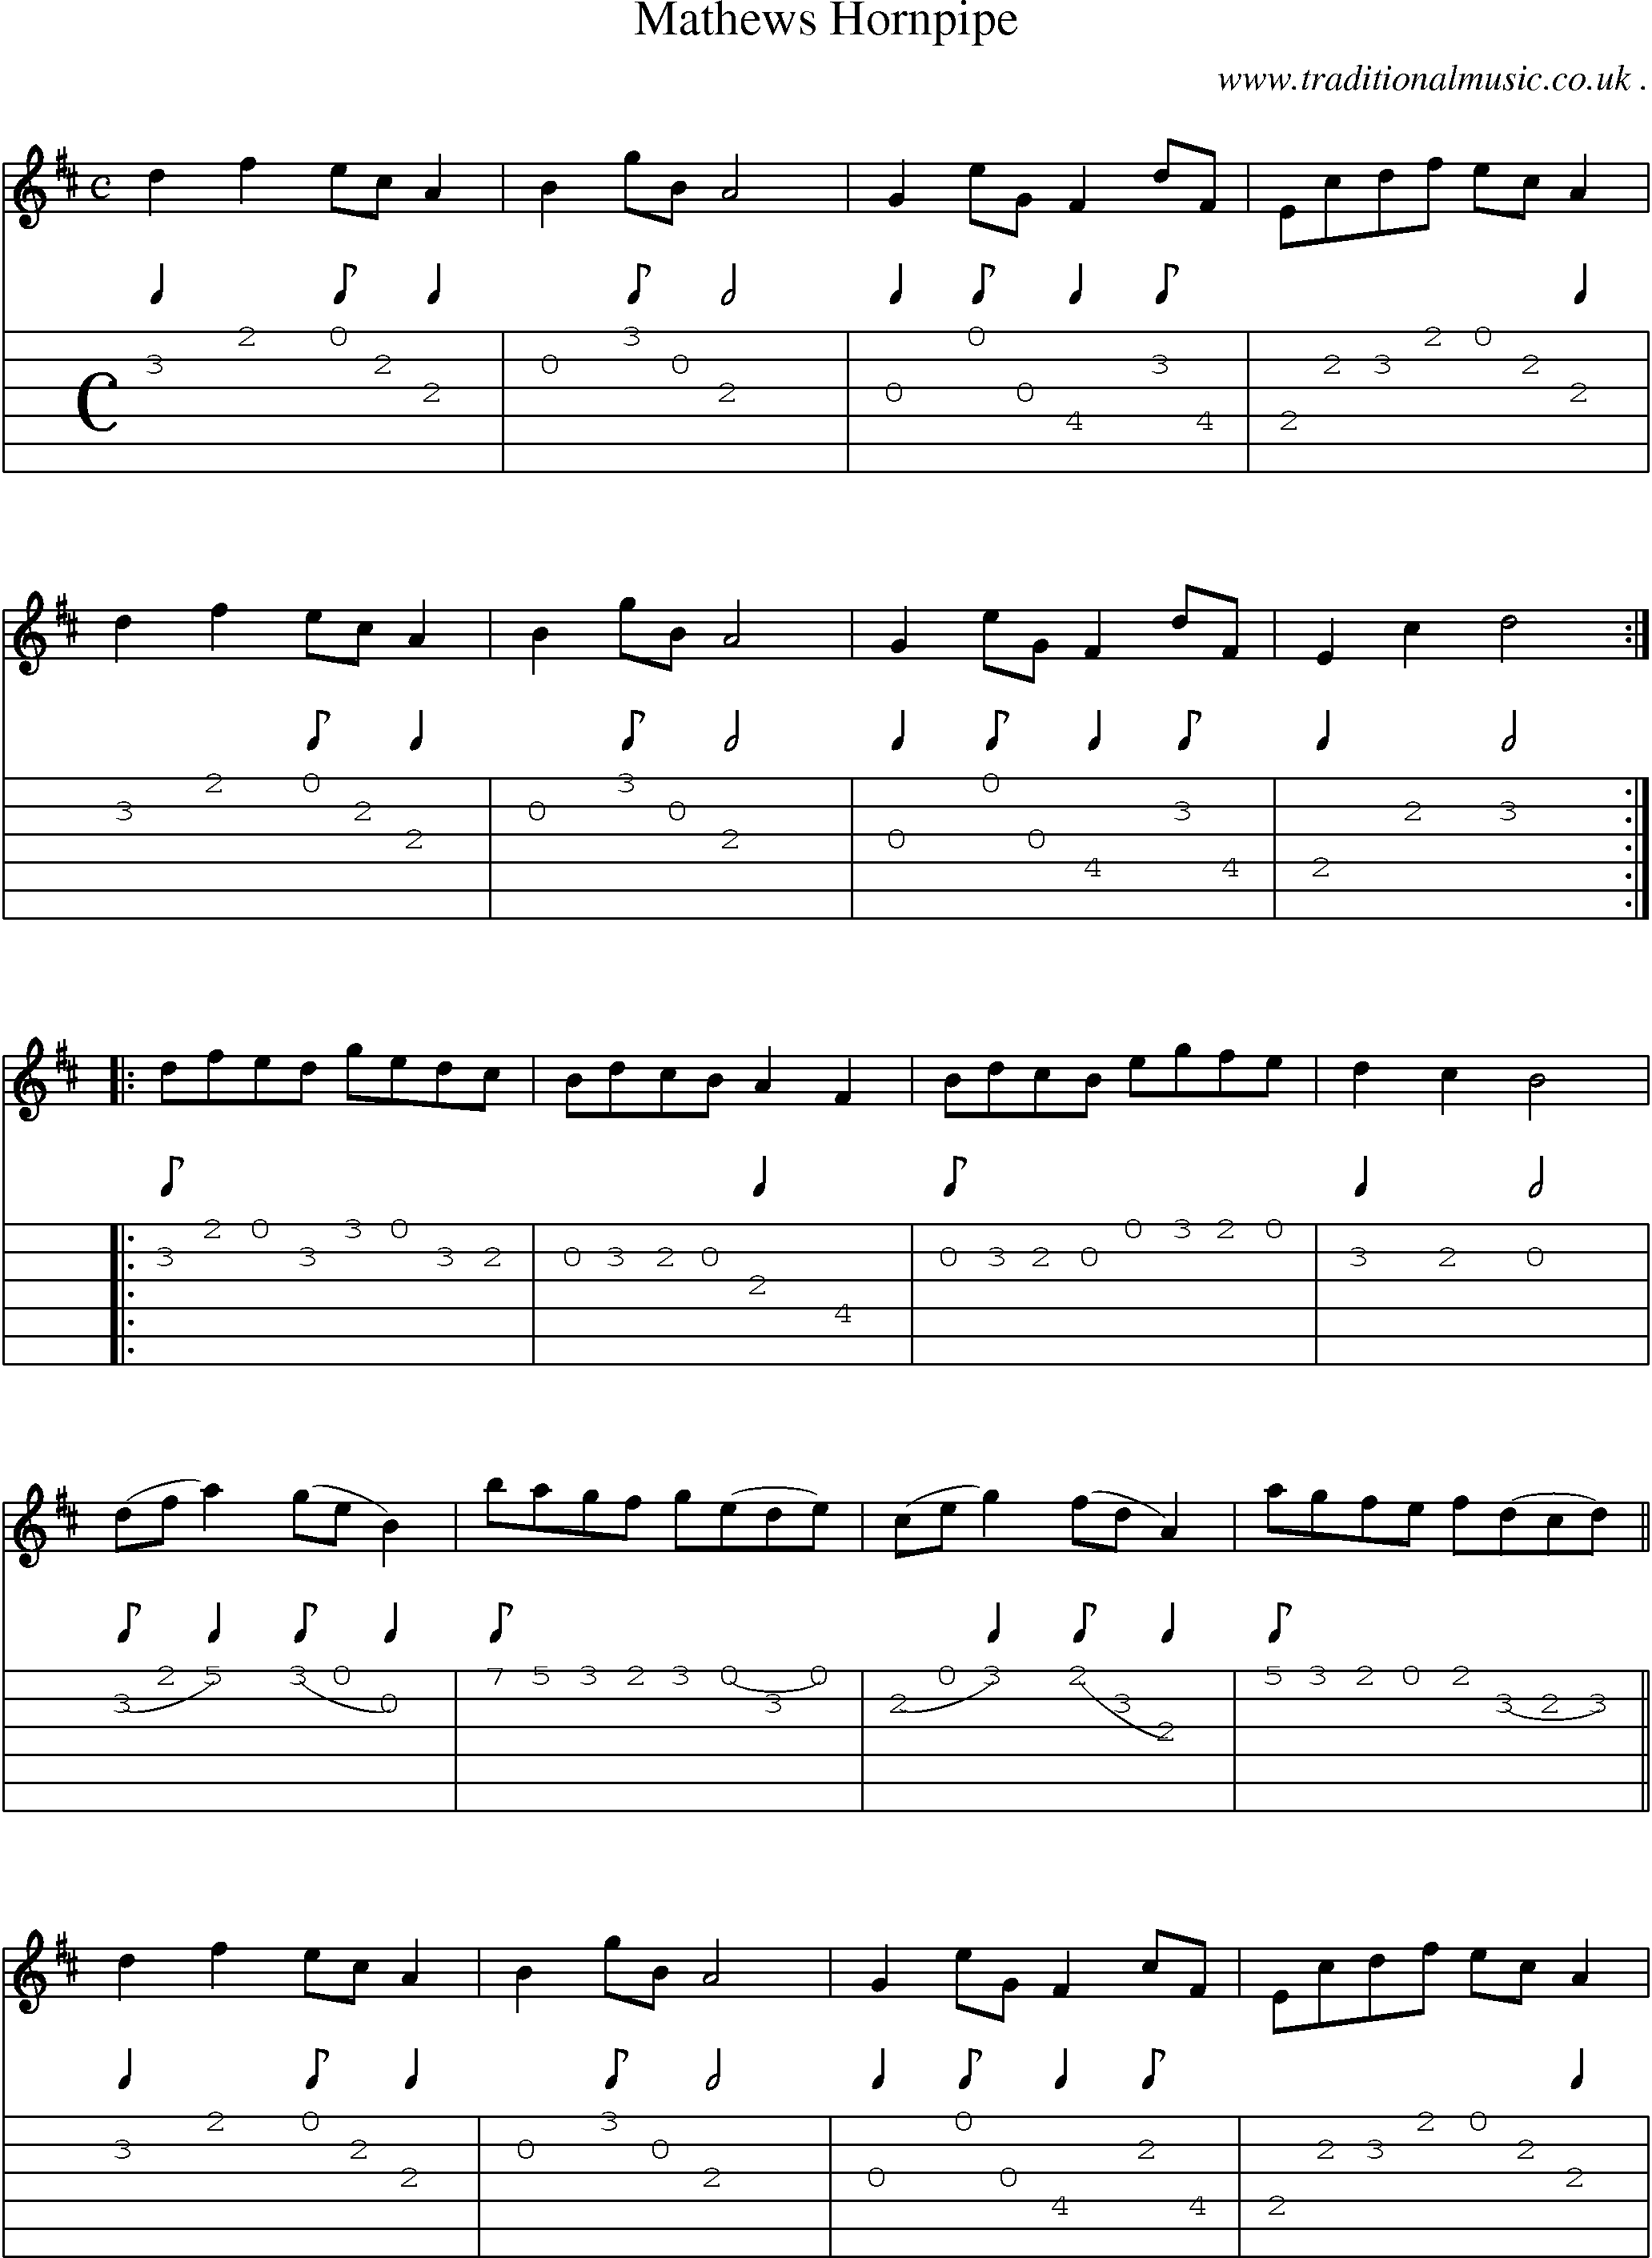 Sheet-Music and Guitar Tabs for Mathews Hornpipe